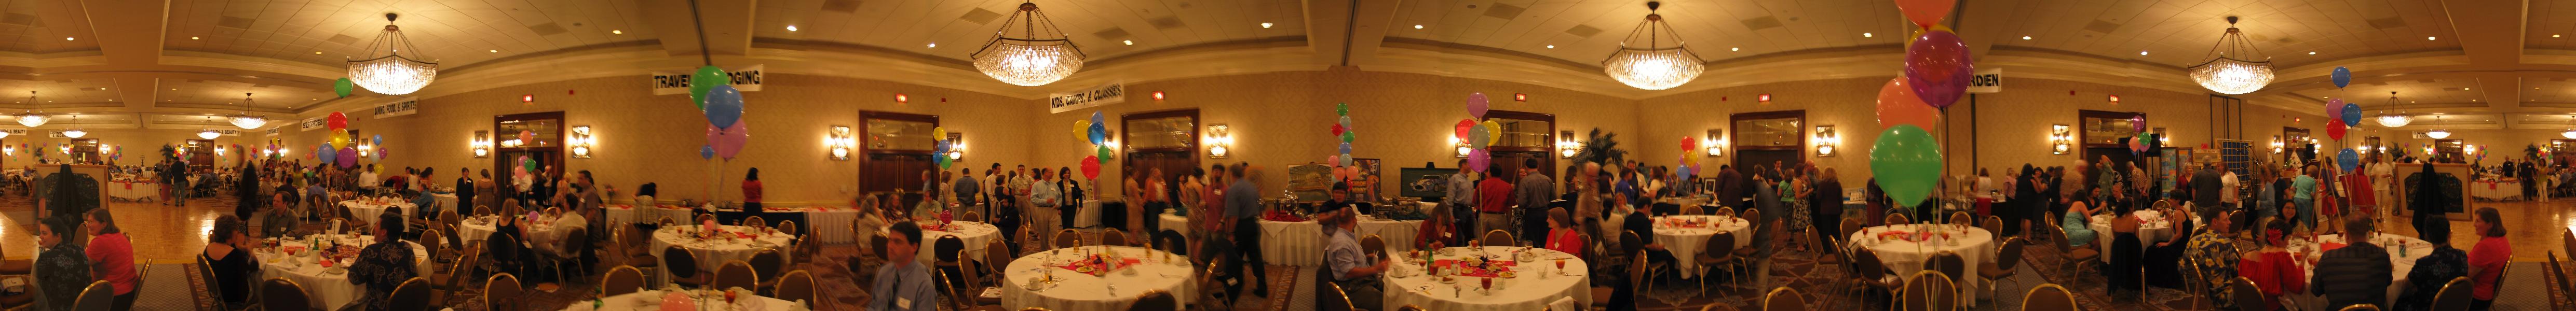 Fiesta Auction, a fundraiser for the kids school